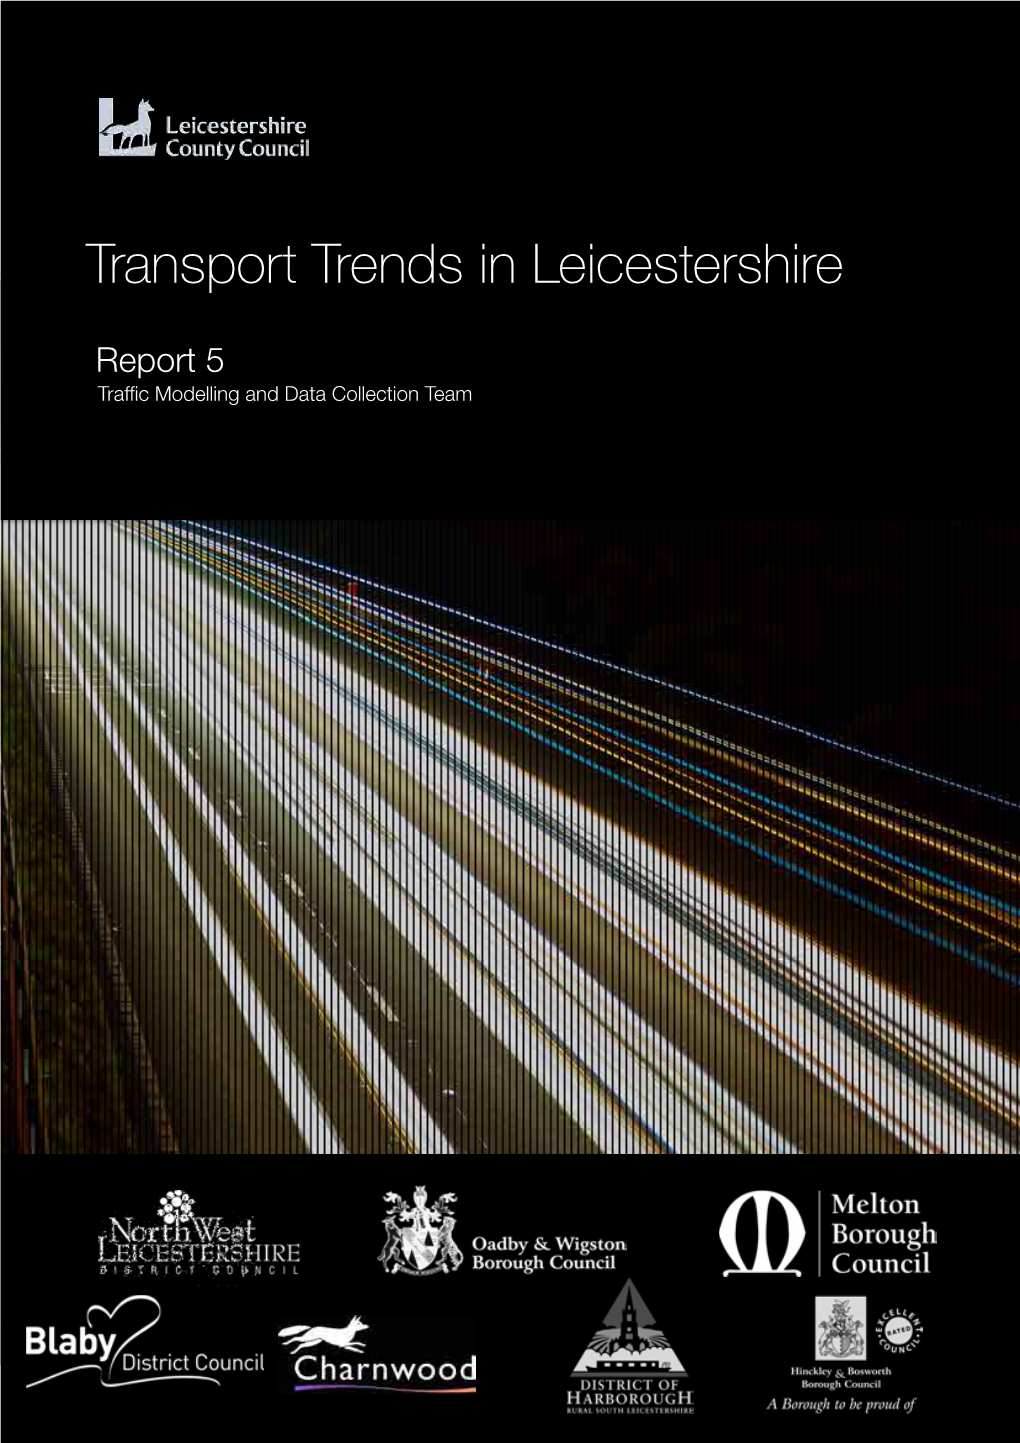 Transport Trends in Leicestershire 2013 PDF, 7.8 Mbopens New Window